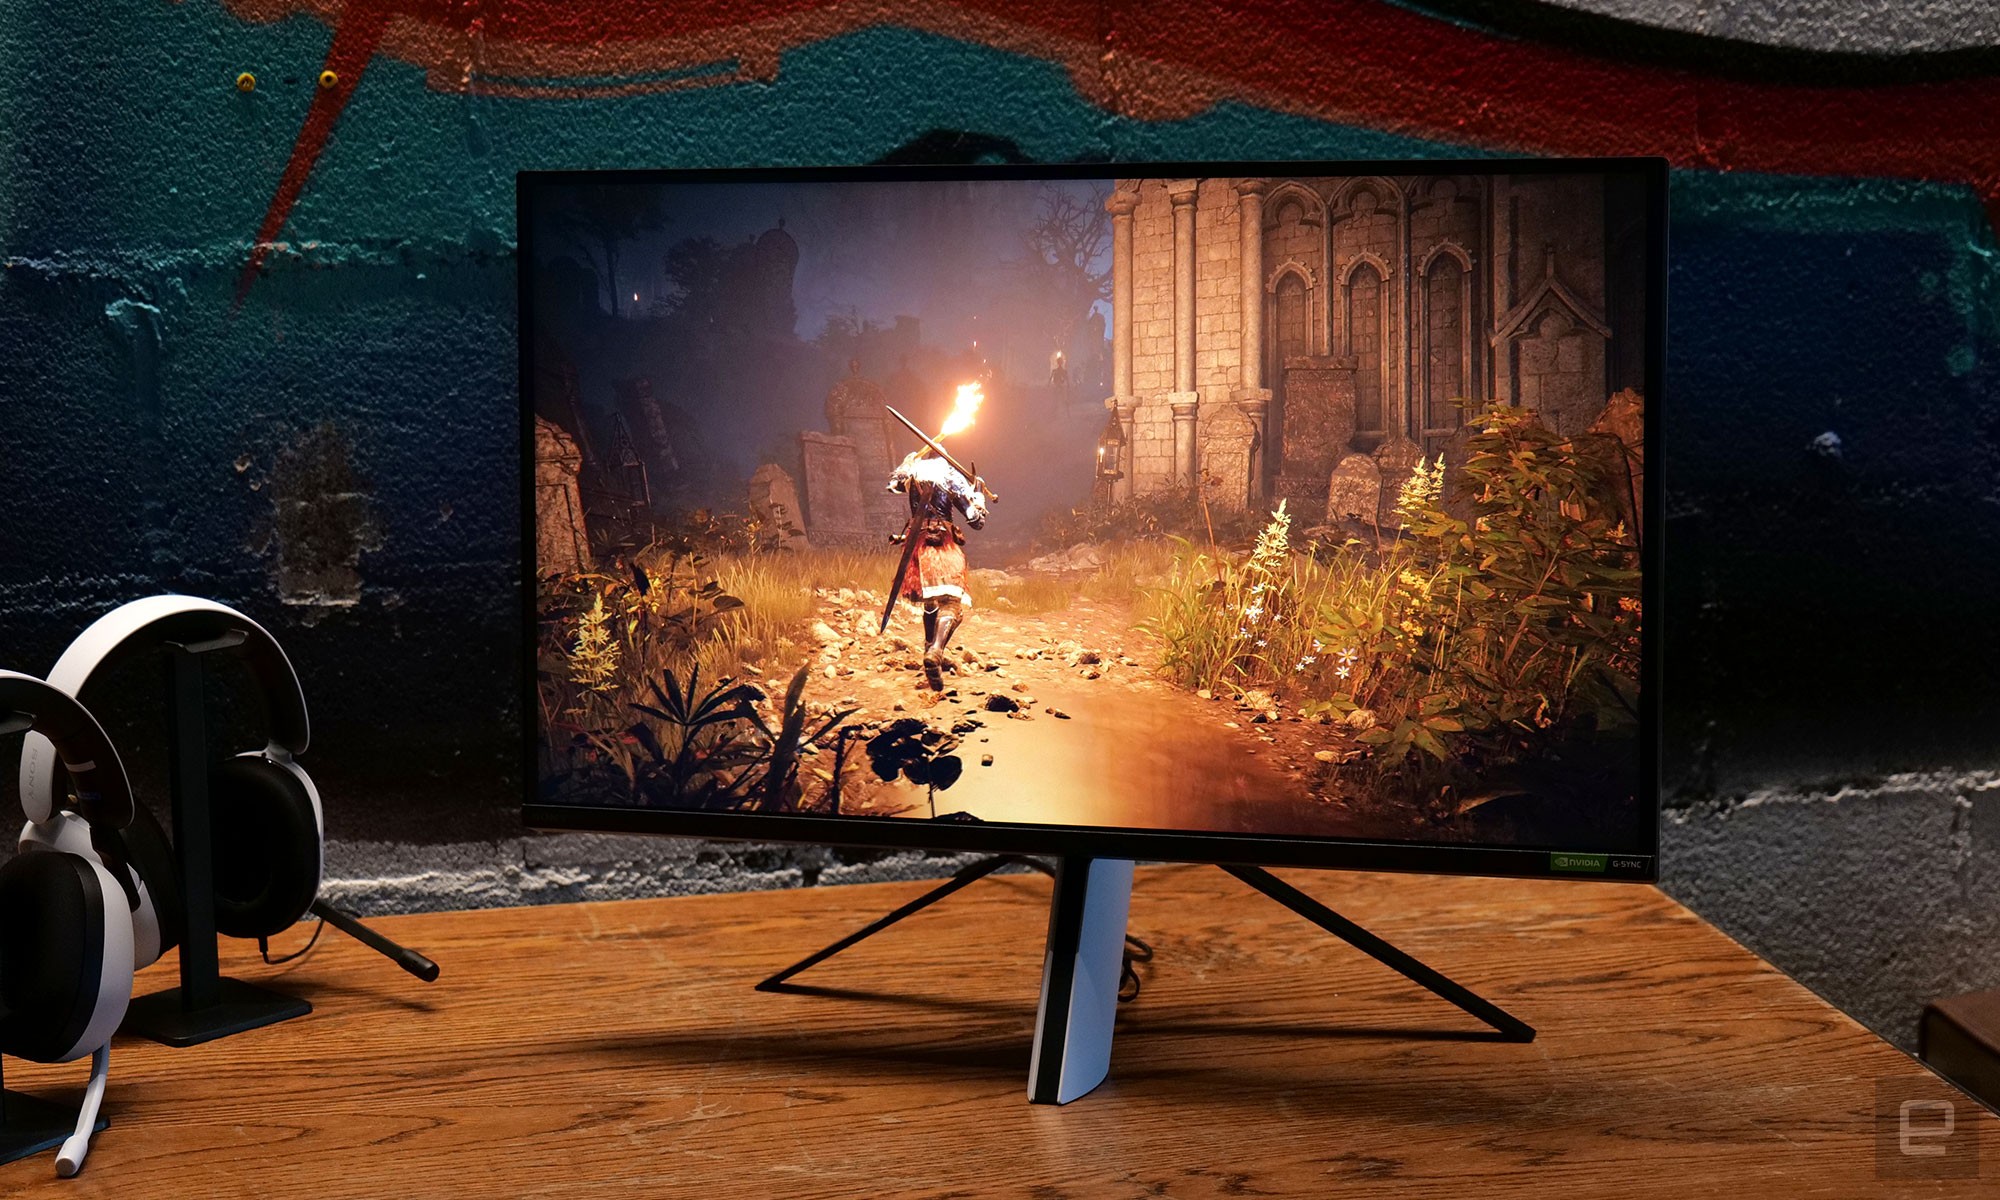 Sony's first monitor under the Inzone brand will be the 27-inch M9 which features a 4K resolution, 144Hz refresh rate and full-array local dimming with 96 lighting zones. 